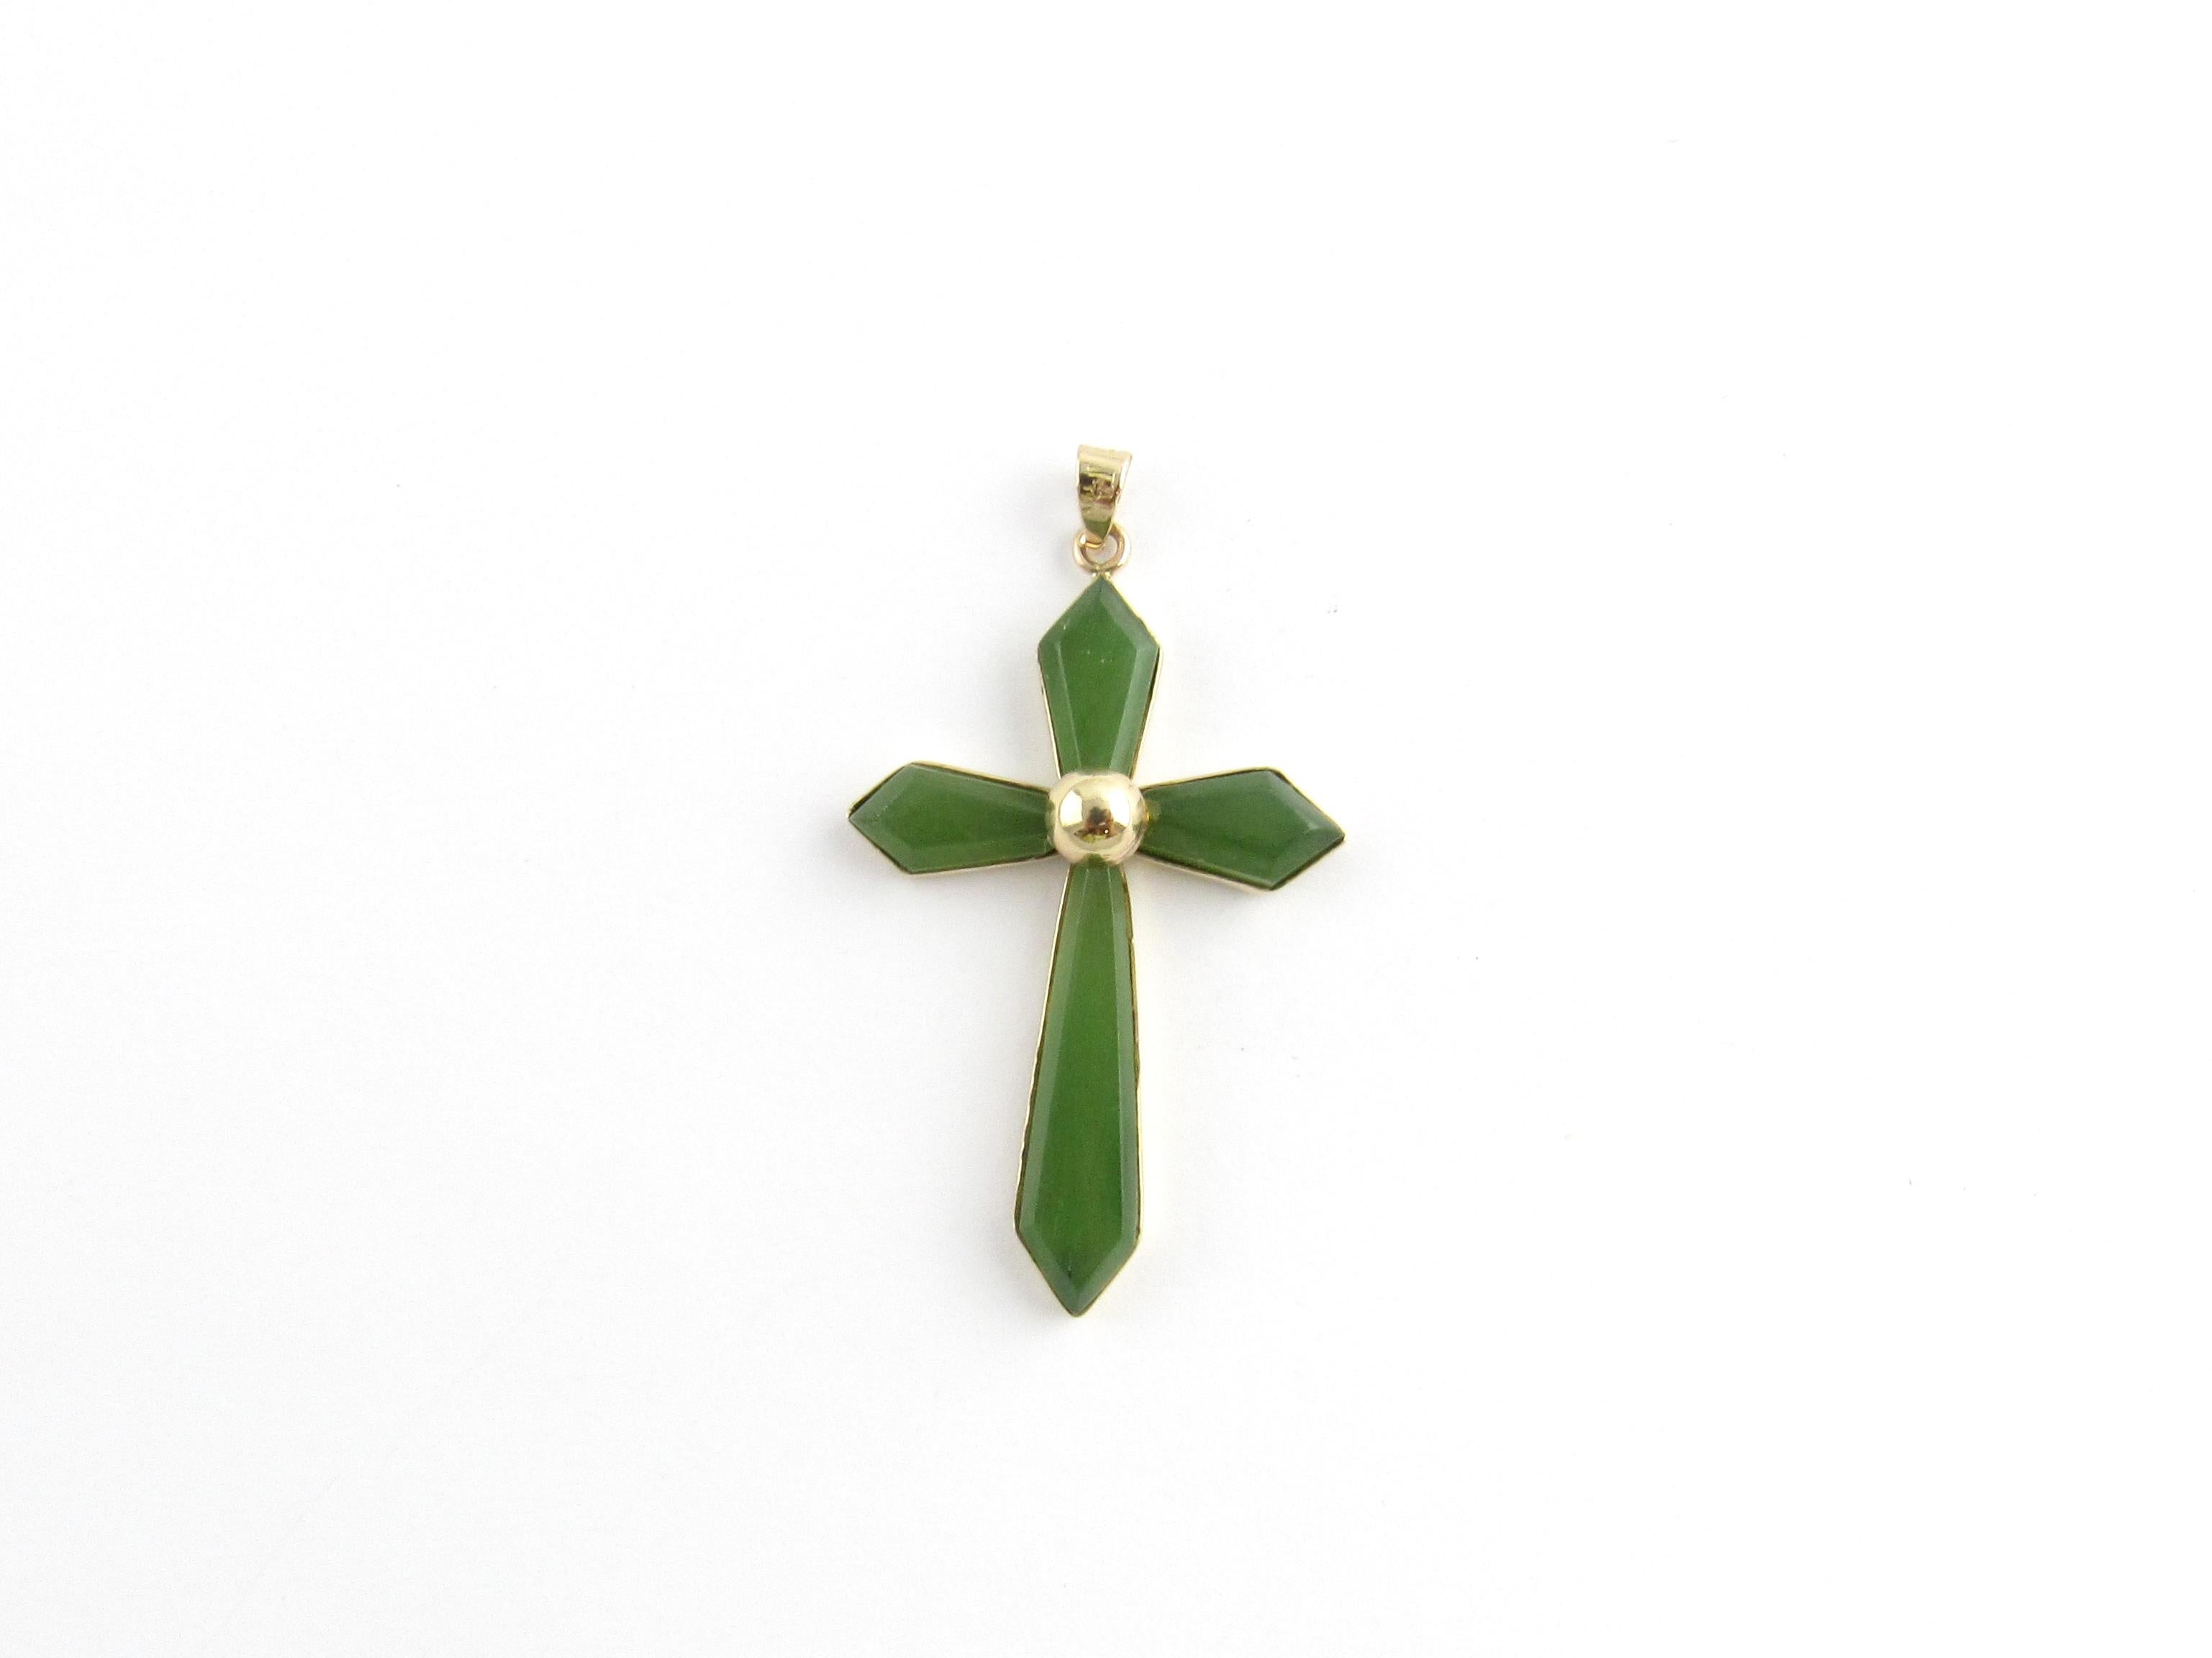 Vintage 14 Karat Yellow Gold and Jade Cross Pendant

This stunning cross pendant is crafted in beautifully detailed jade set in classic 14K yellow gold.

Size: 41 mm x 26 mm

Weight: 2.0 dwt. / 3.2 gr.

Stamped: 14K

Very good condition,